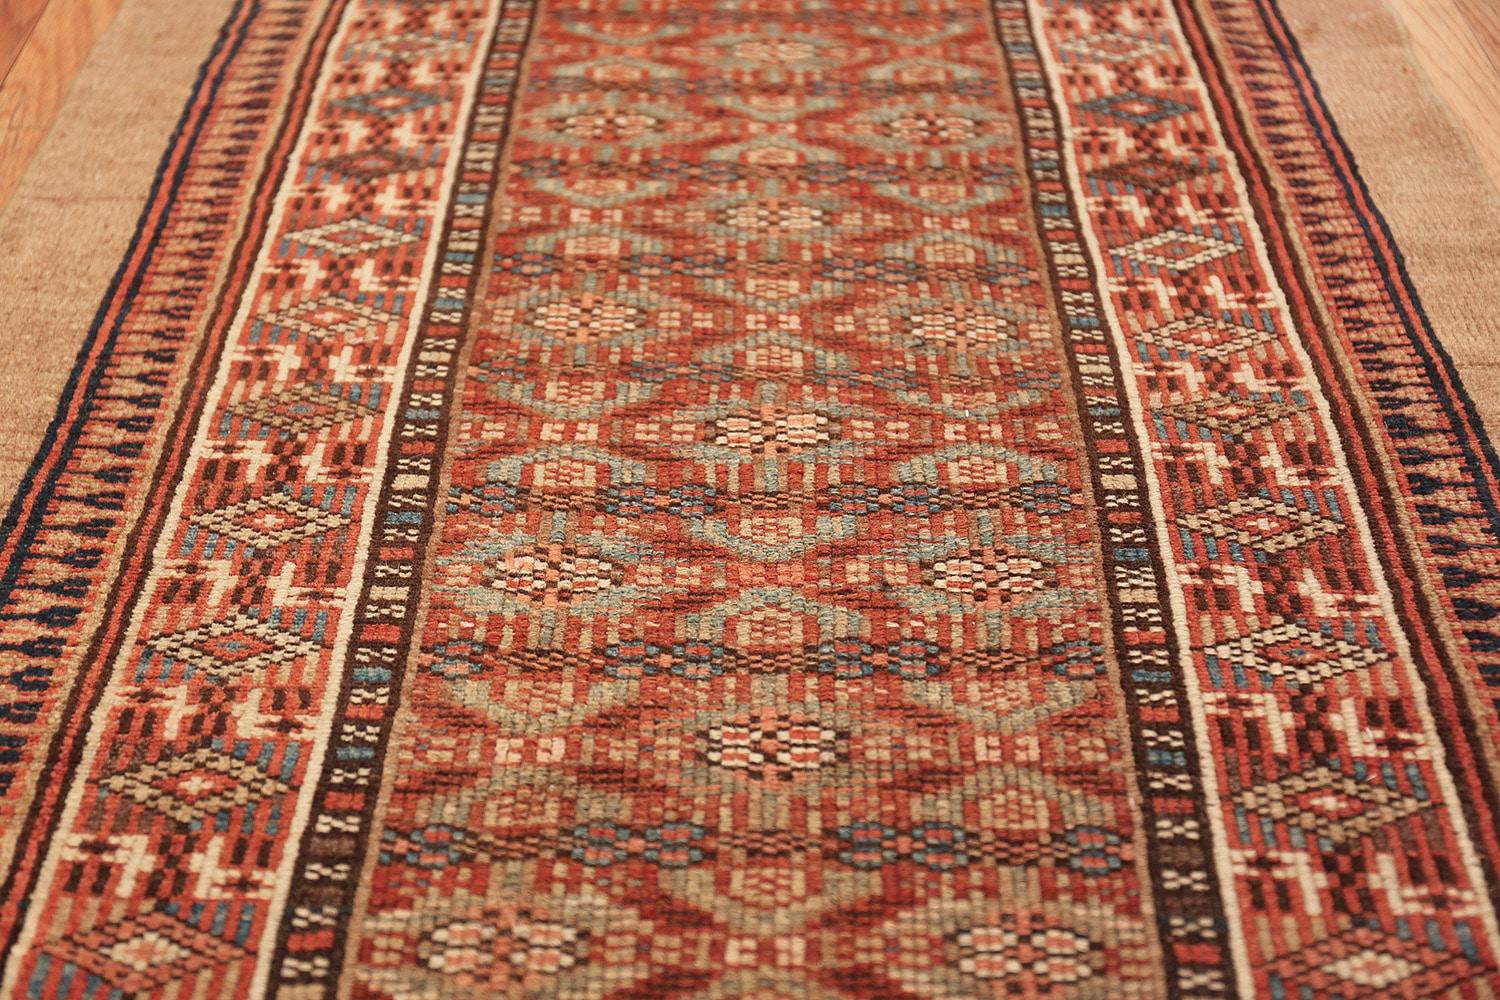 Hand-Knotted Tribal Long and Narrow Antique Persian Serab Runner Rug. Size: 2 ft 8 in x 16 ft